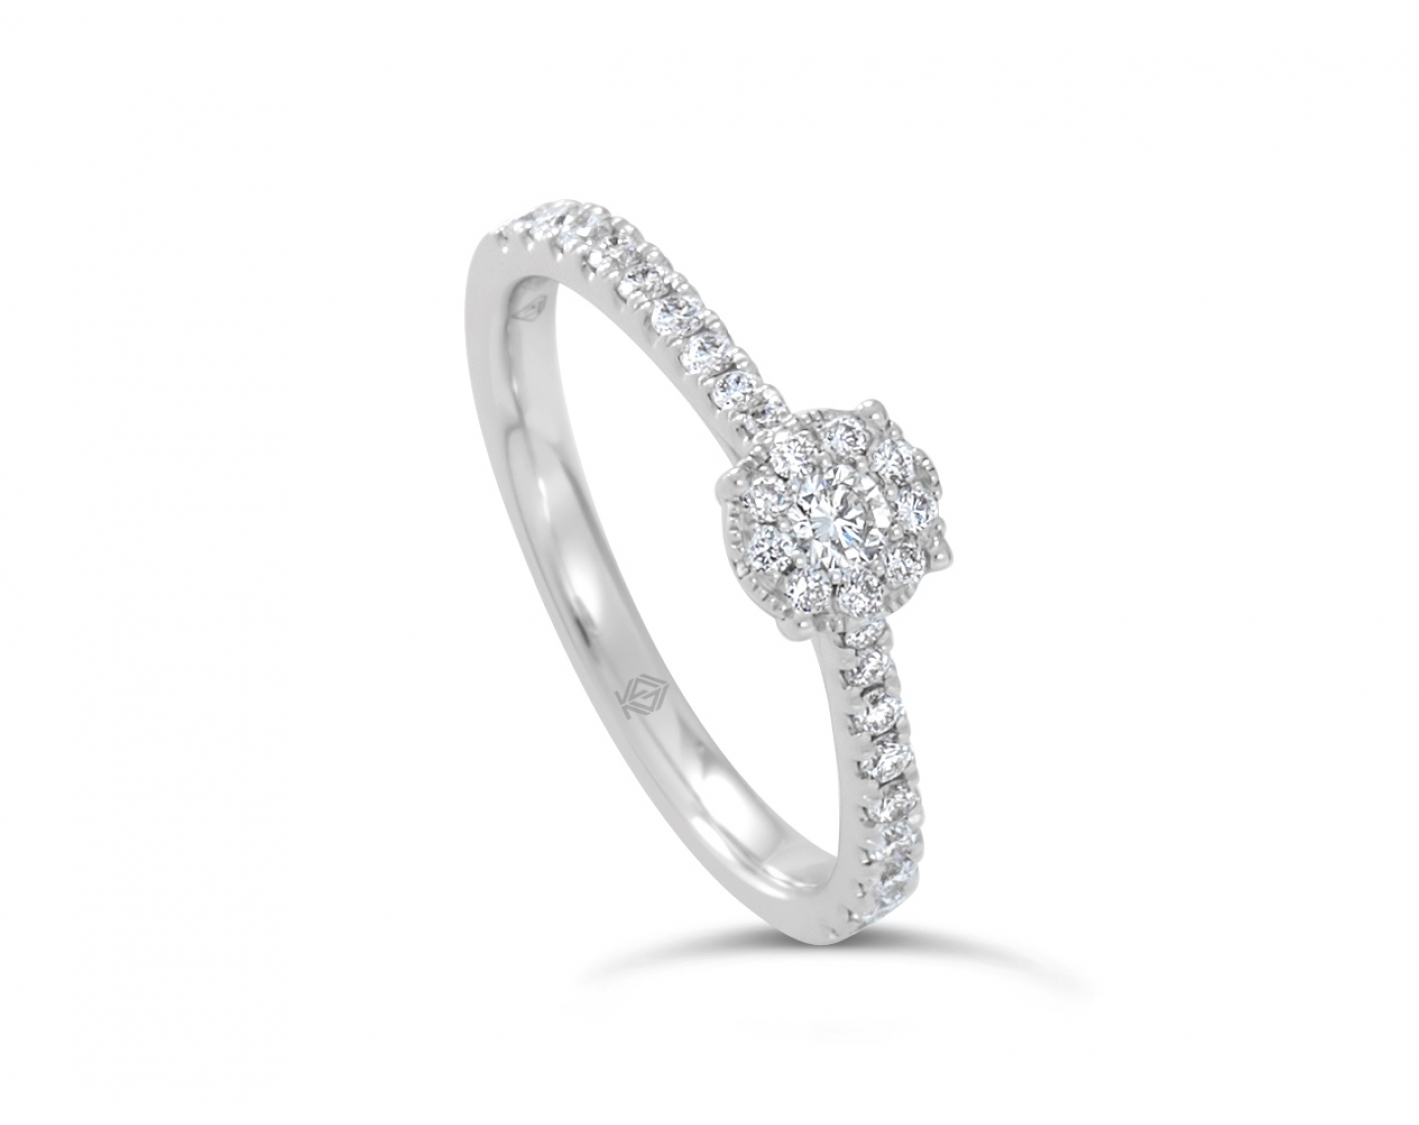 18k white gold cathedral halo illusion set engagement ring with round pave set sidestones